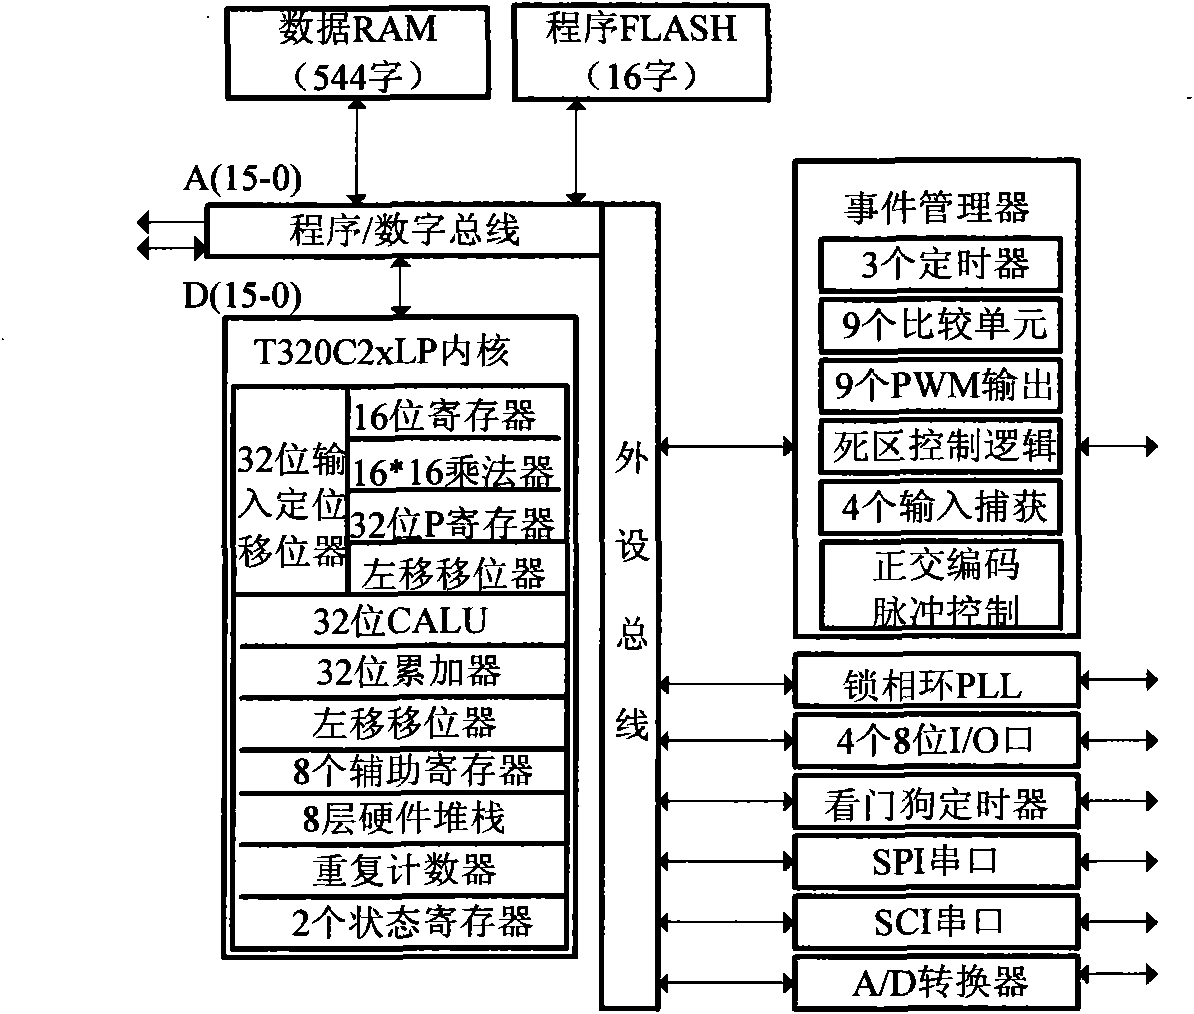 STATCOM (static compensator) control method based on switching system theory